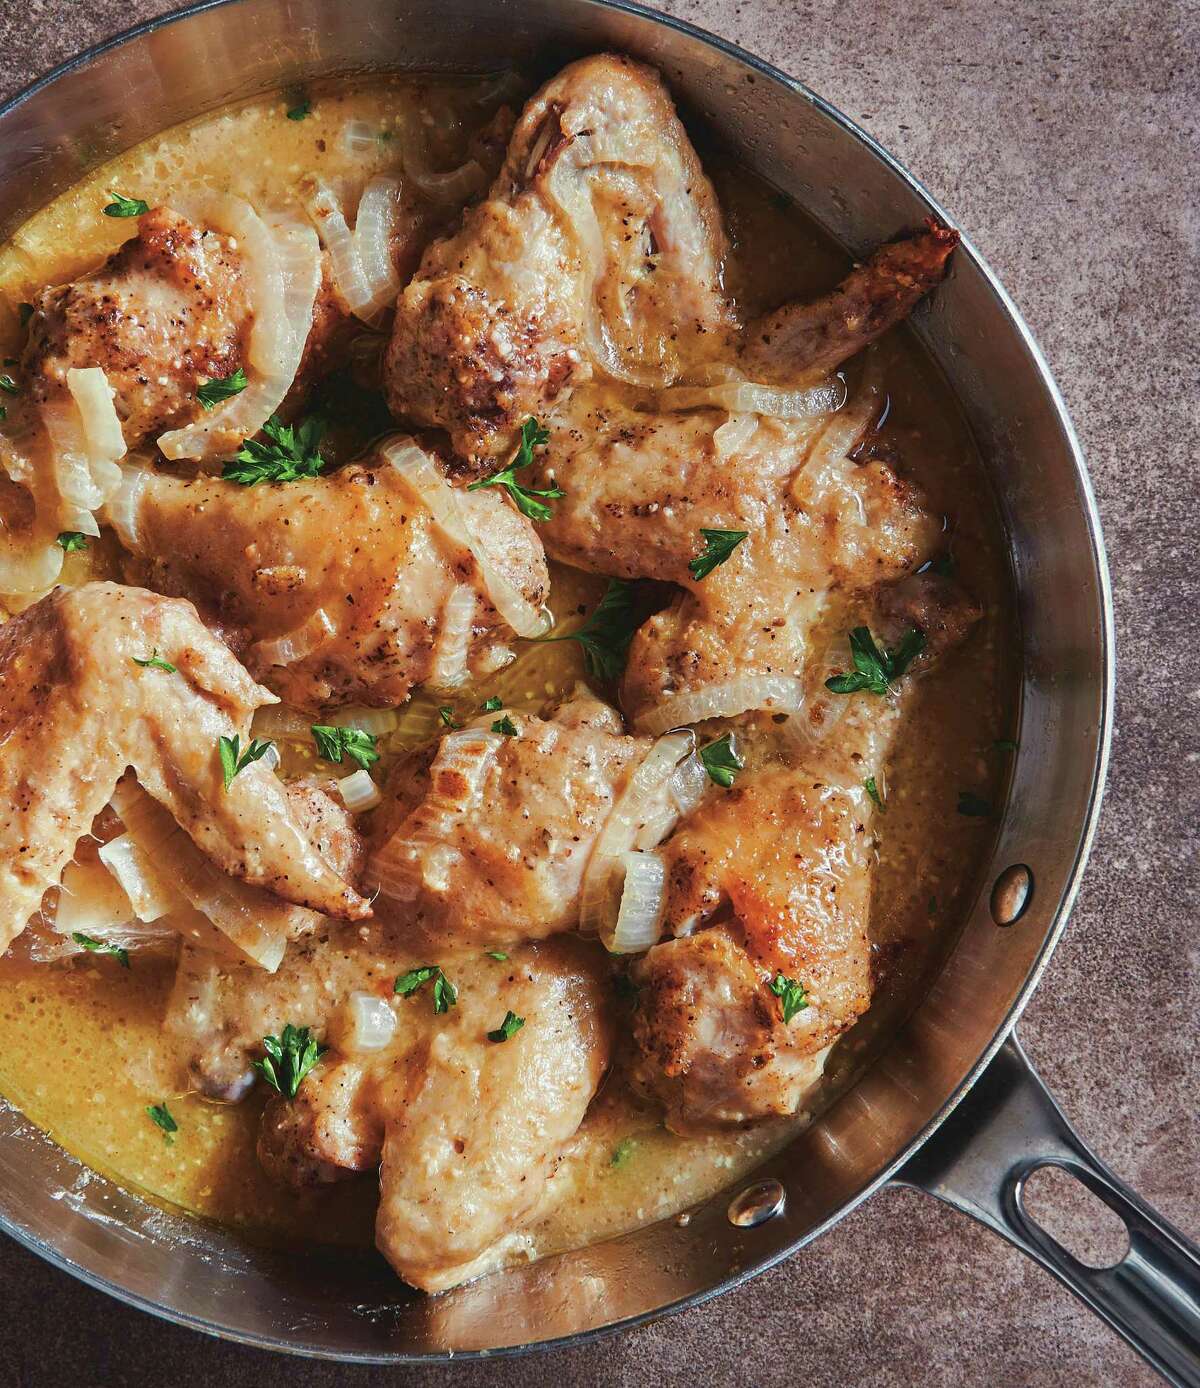 Lower-Calorie Smothered Chicken with Brown Gravy from "Healthier Southern Cooking" by Eric and Shanna Jones.